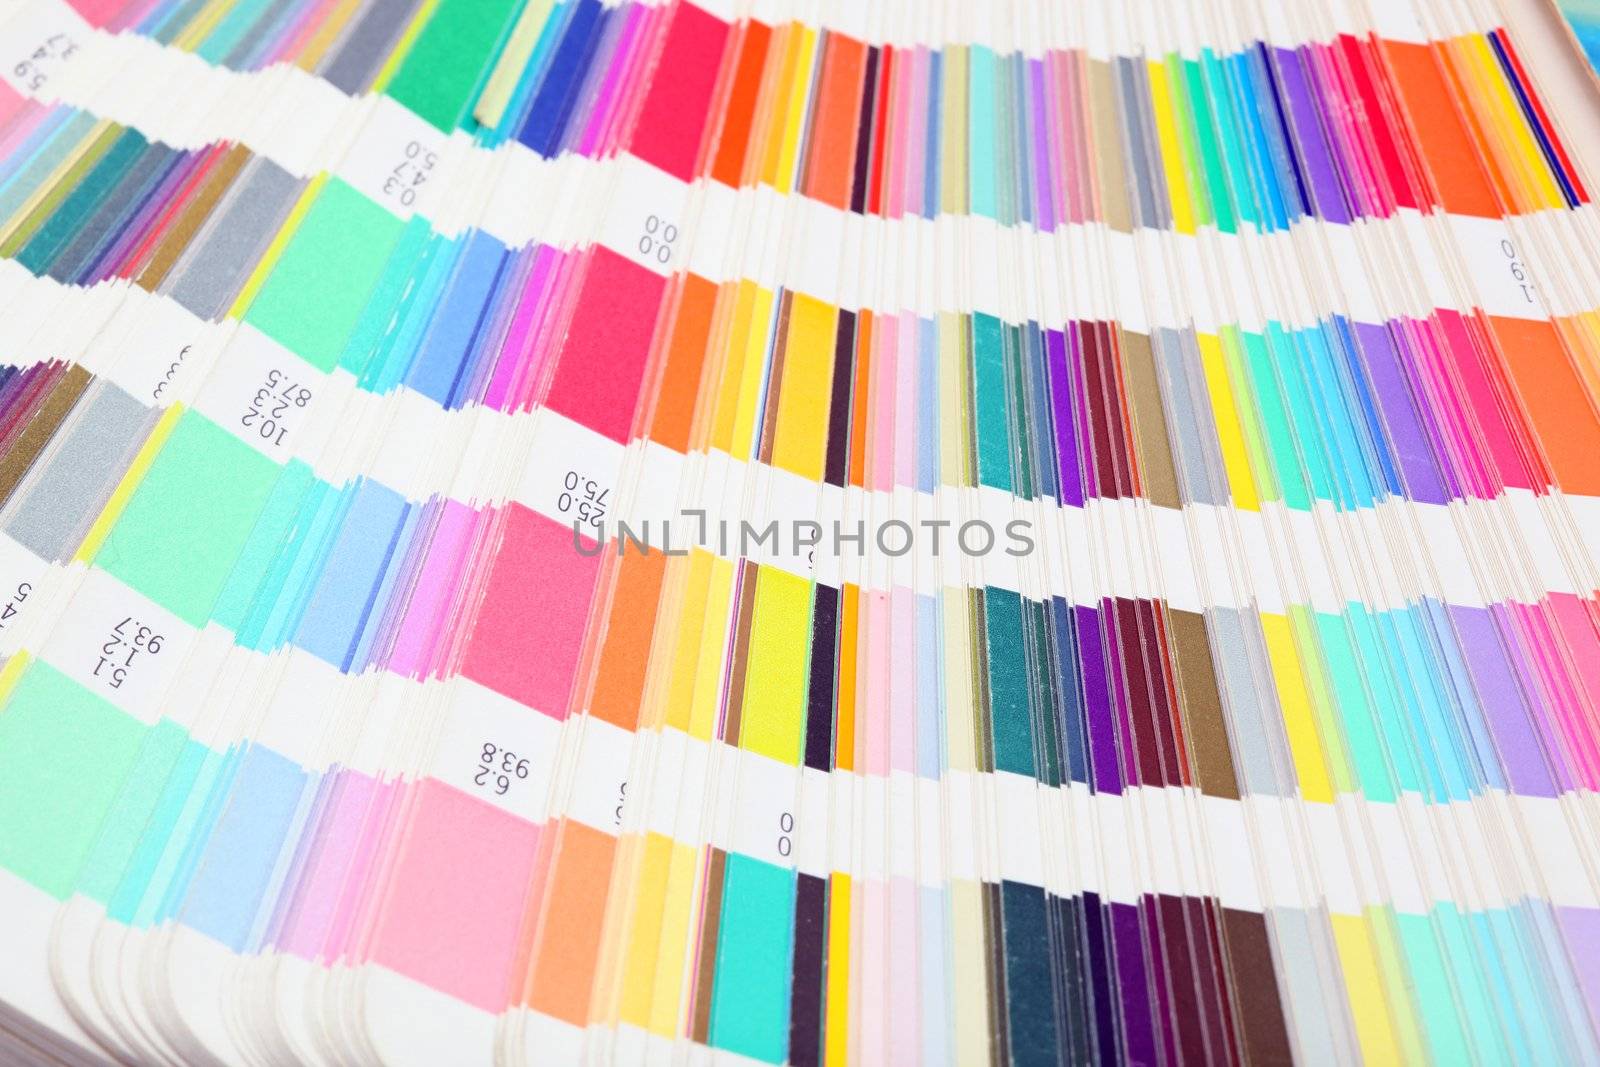 detail from pantone color scale lithography and printing industry